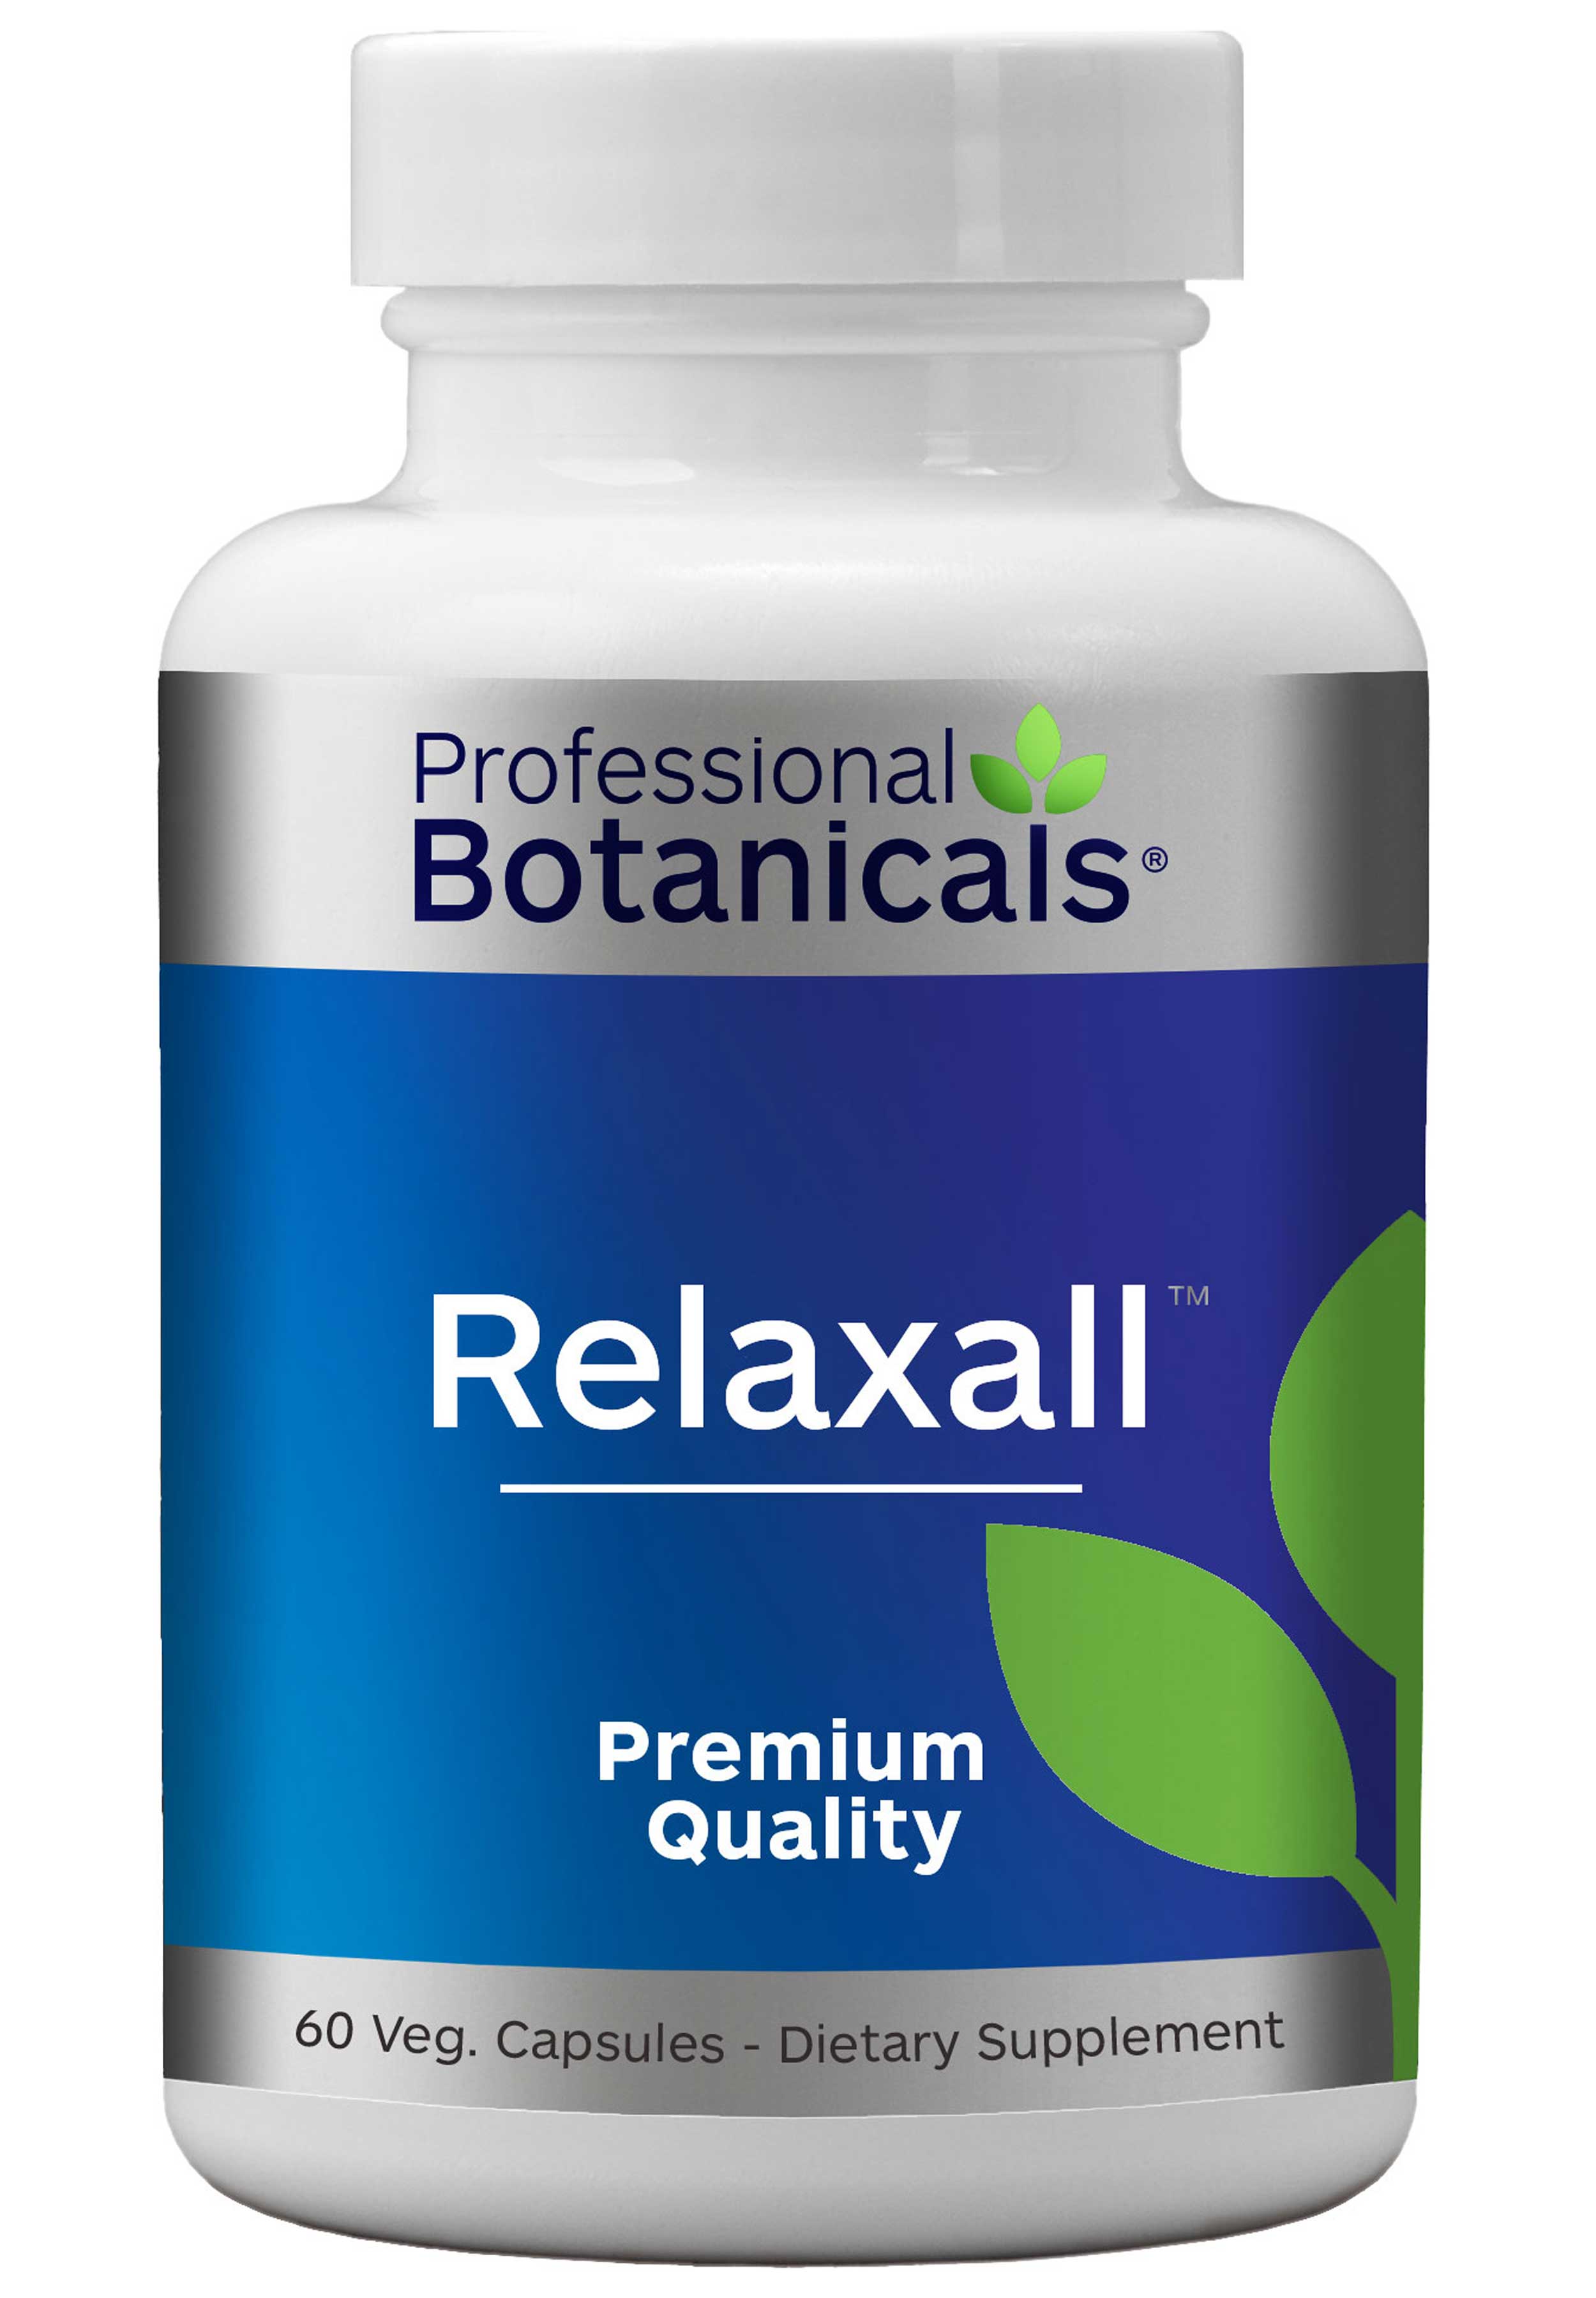 Professional Botanicals Relaxall